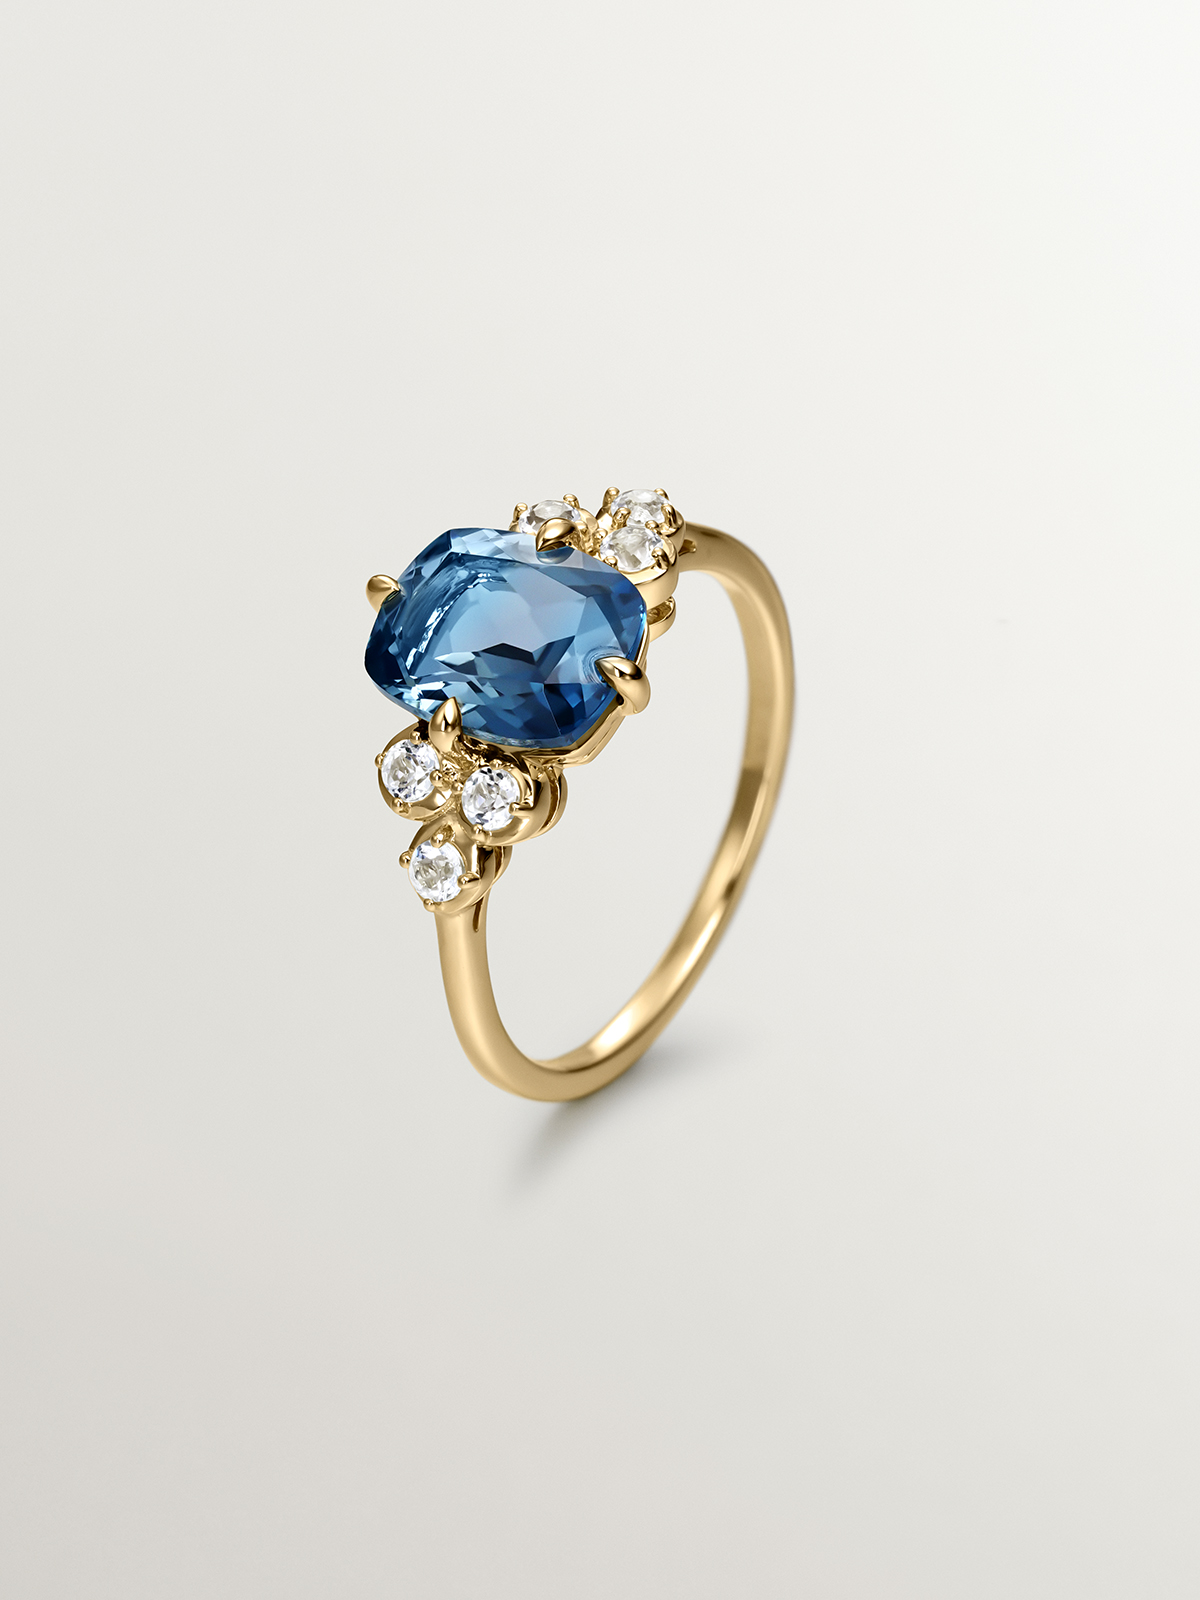 925 Silver ring bathed in 18K yellow gold with white topaz and London blue.